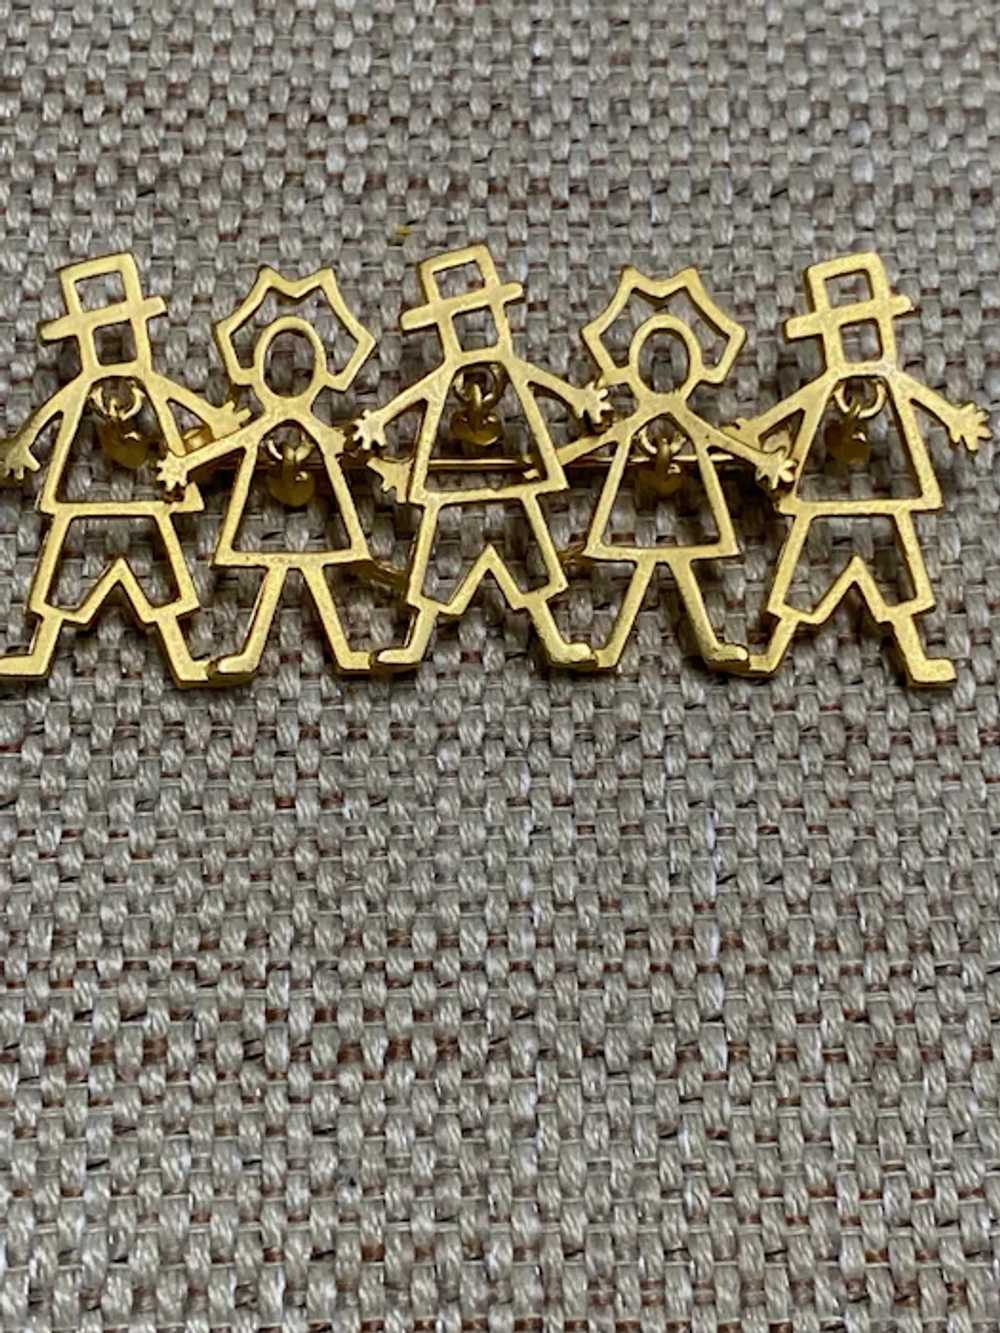 19802 Unity Pin / Brooch by AJC - image 2